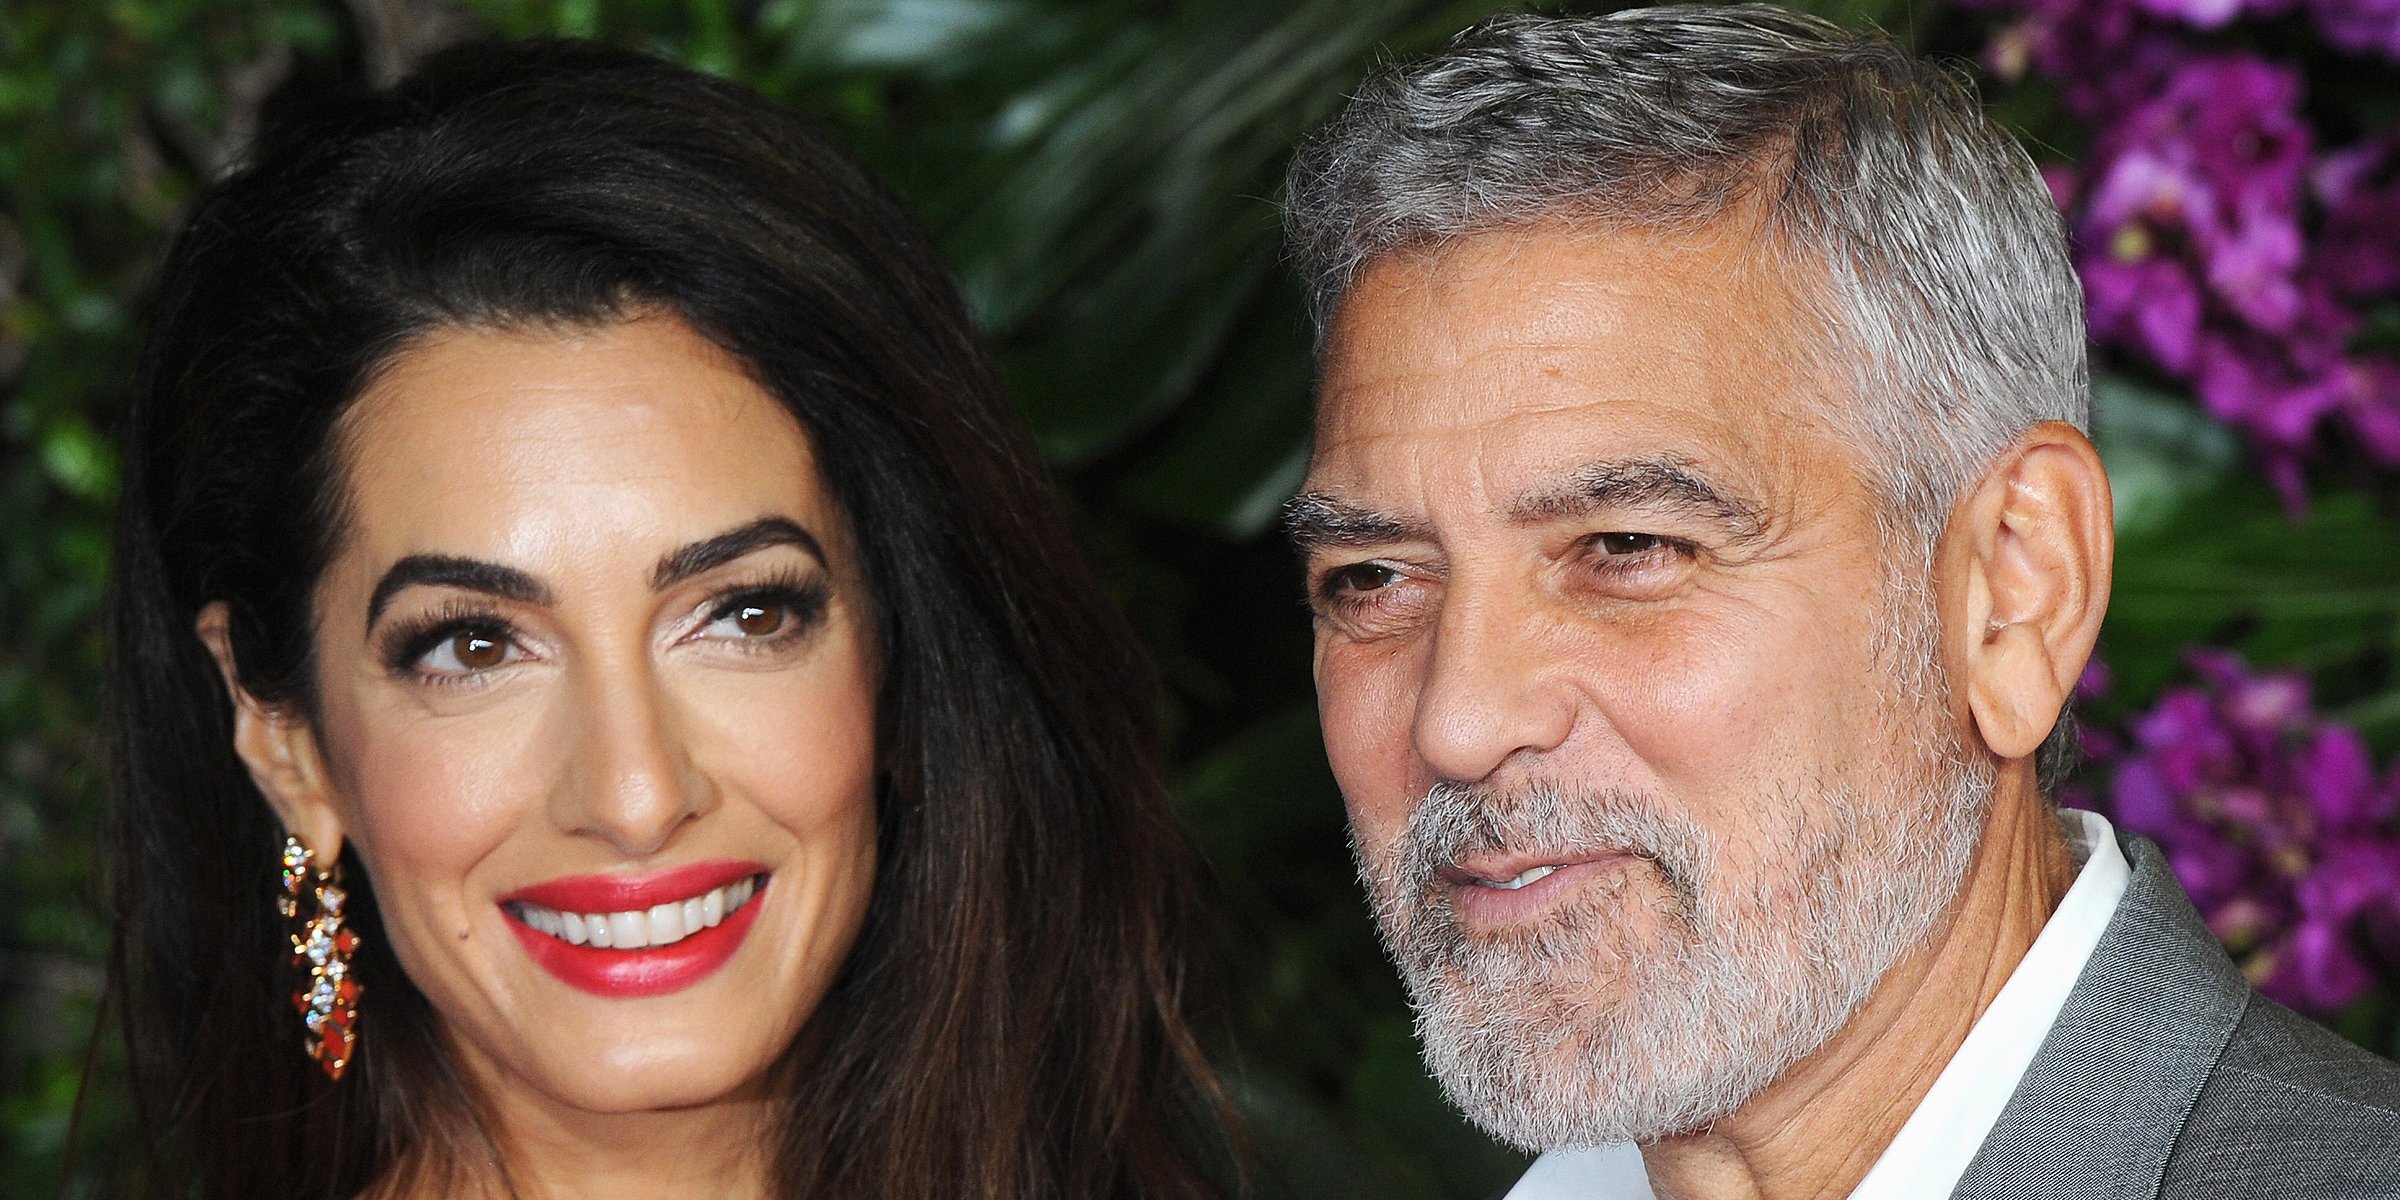 Amal Clooney and George Clooney | Source: Getty Images